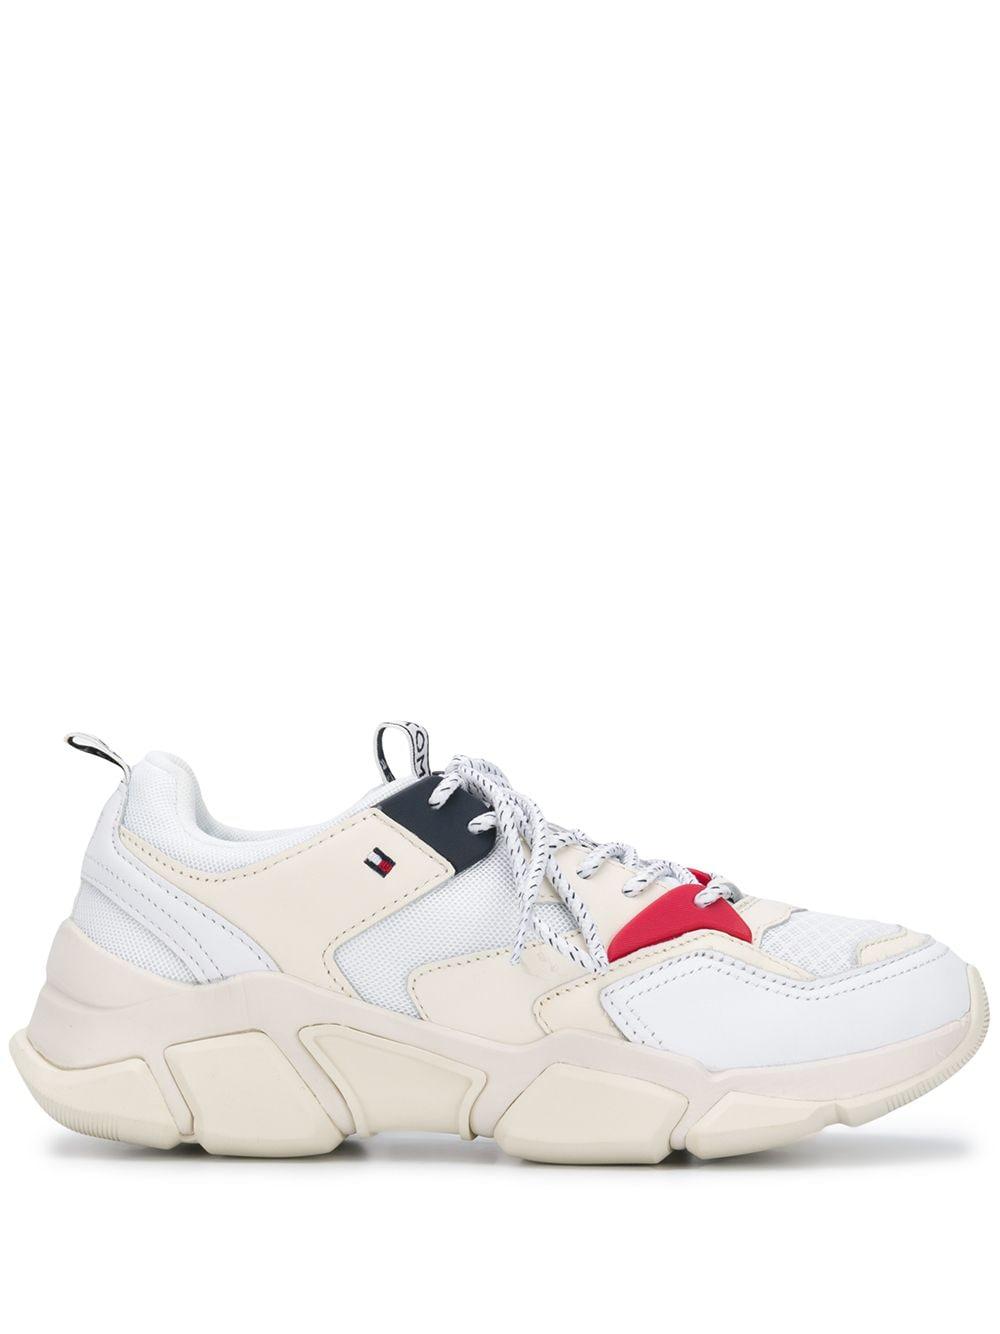 Tommy Hilfiger Leather Chunky Sneakers in White - Lyst